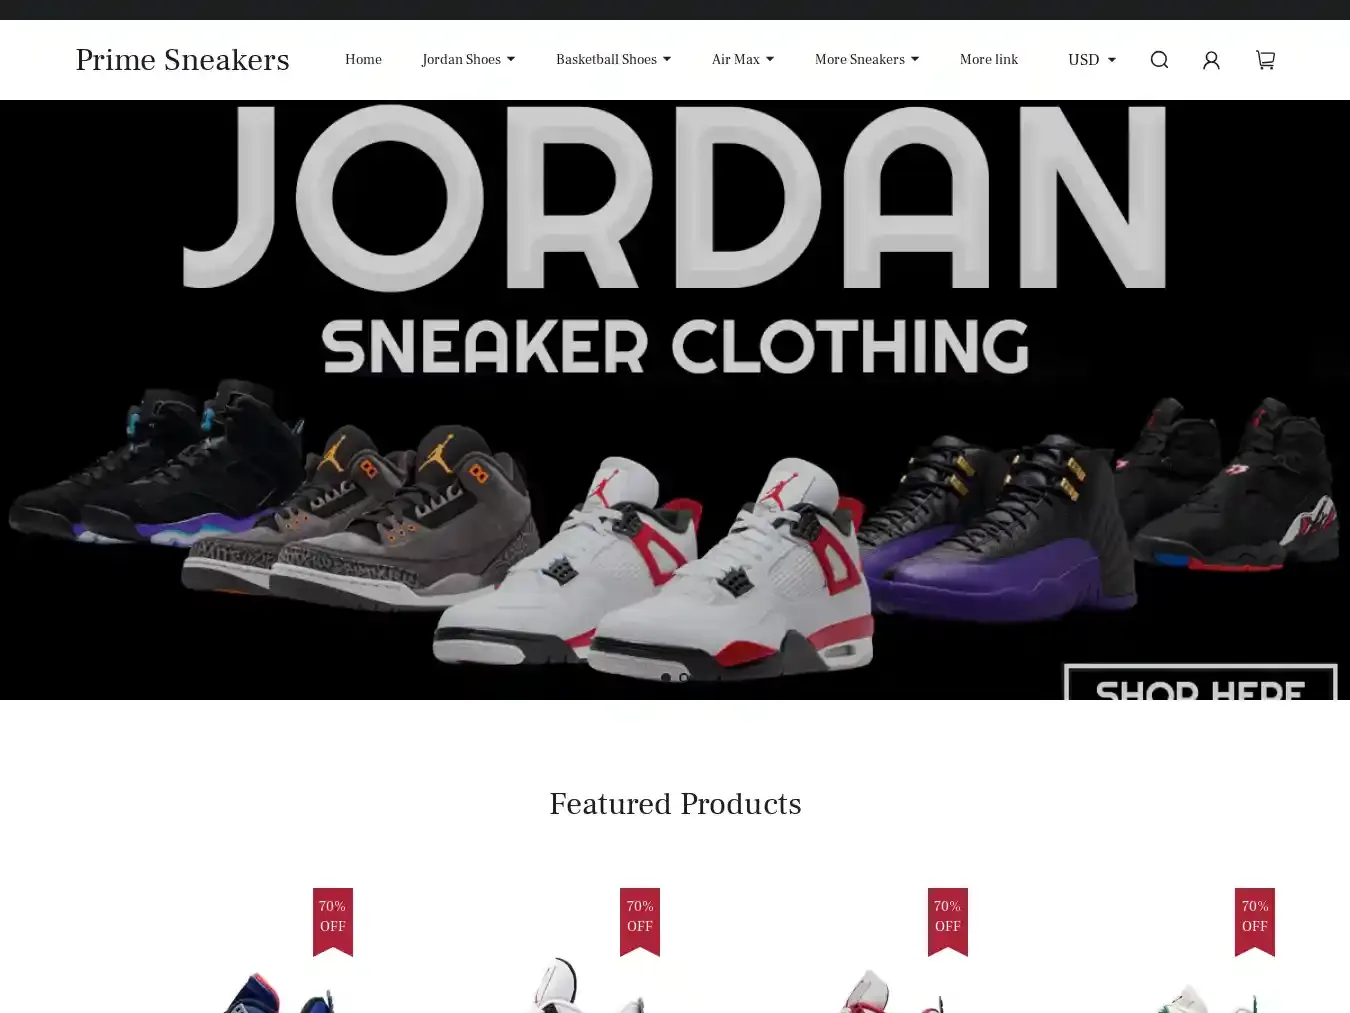 Hotsneakers.net Fraudulent Non-Delivery website.